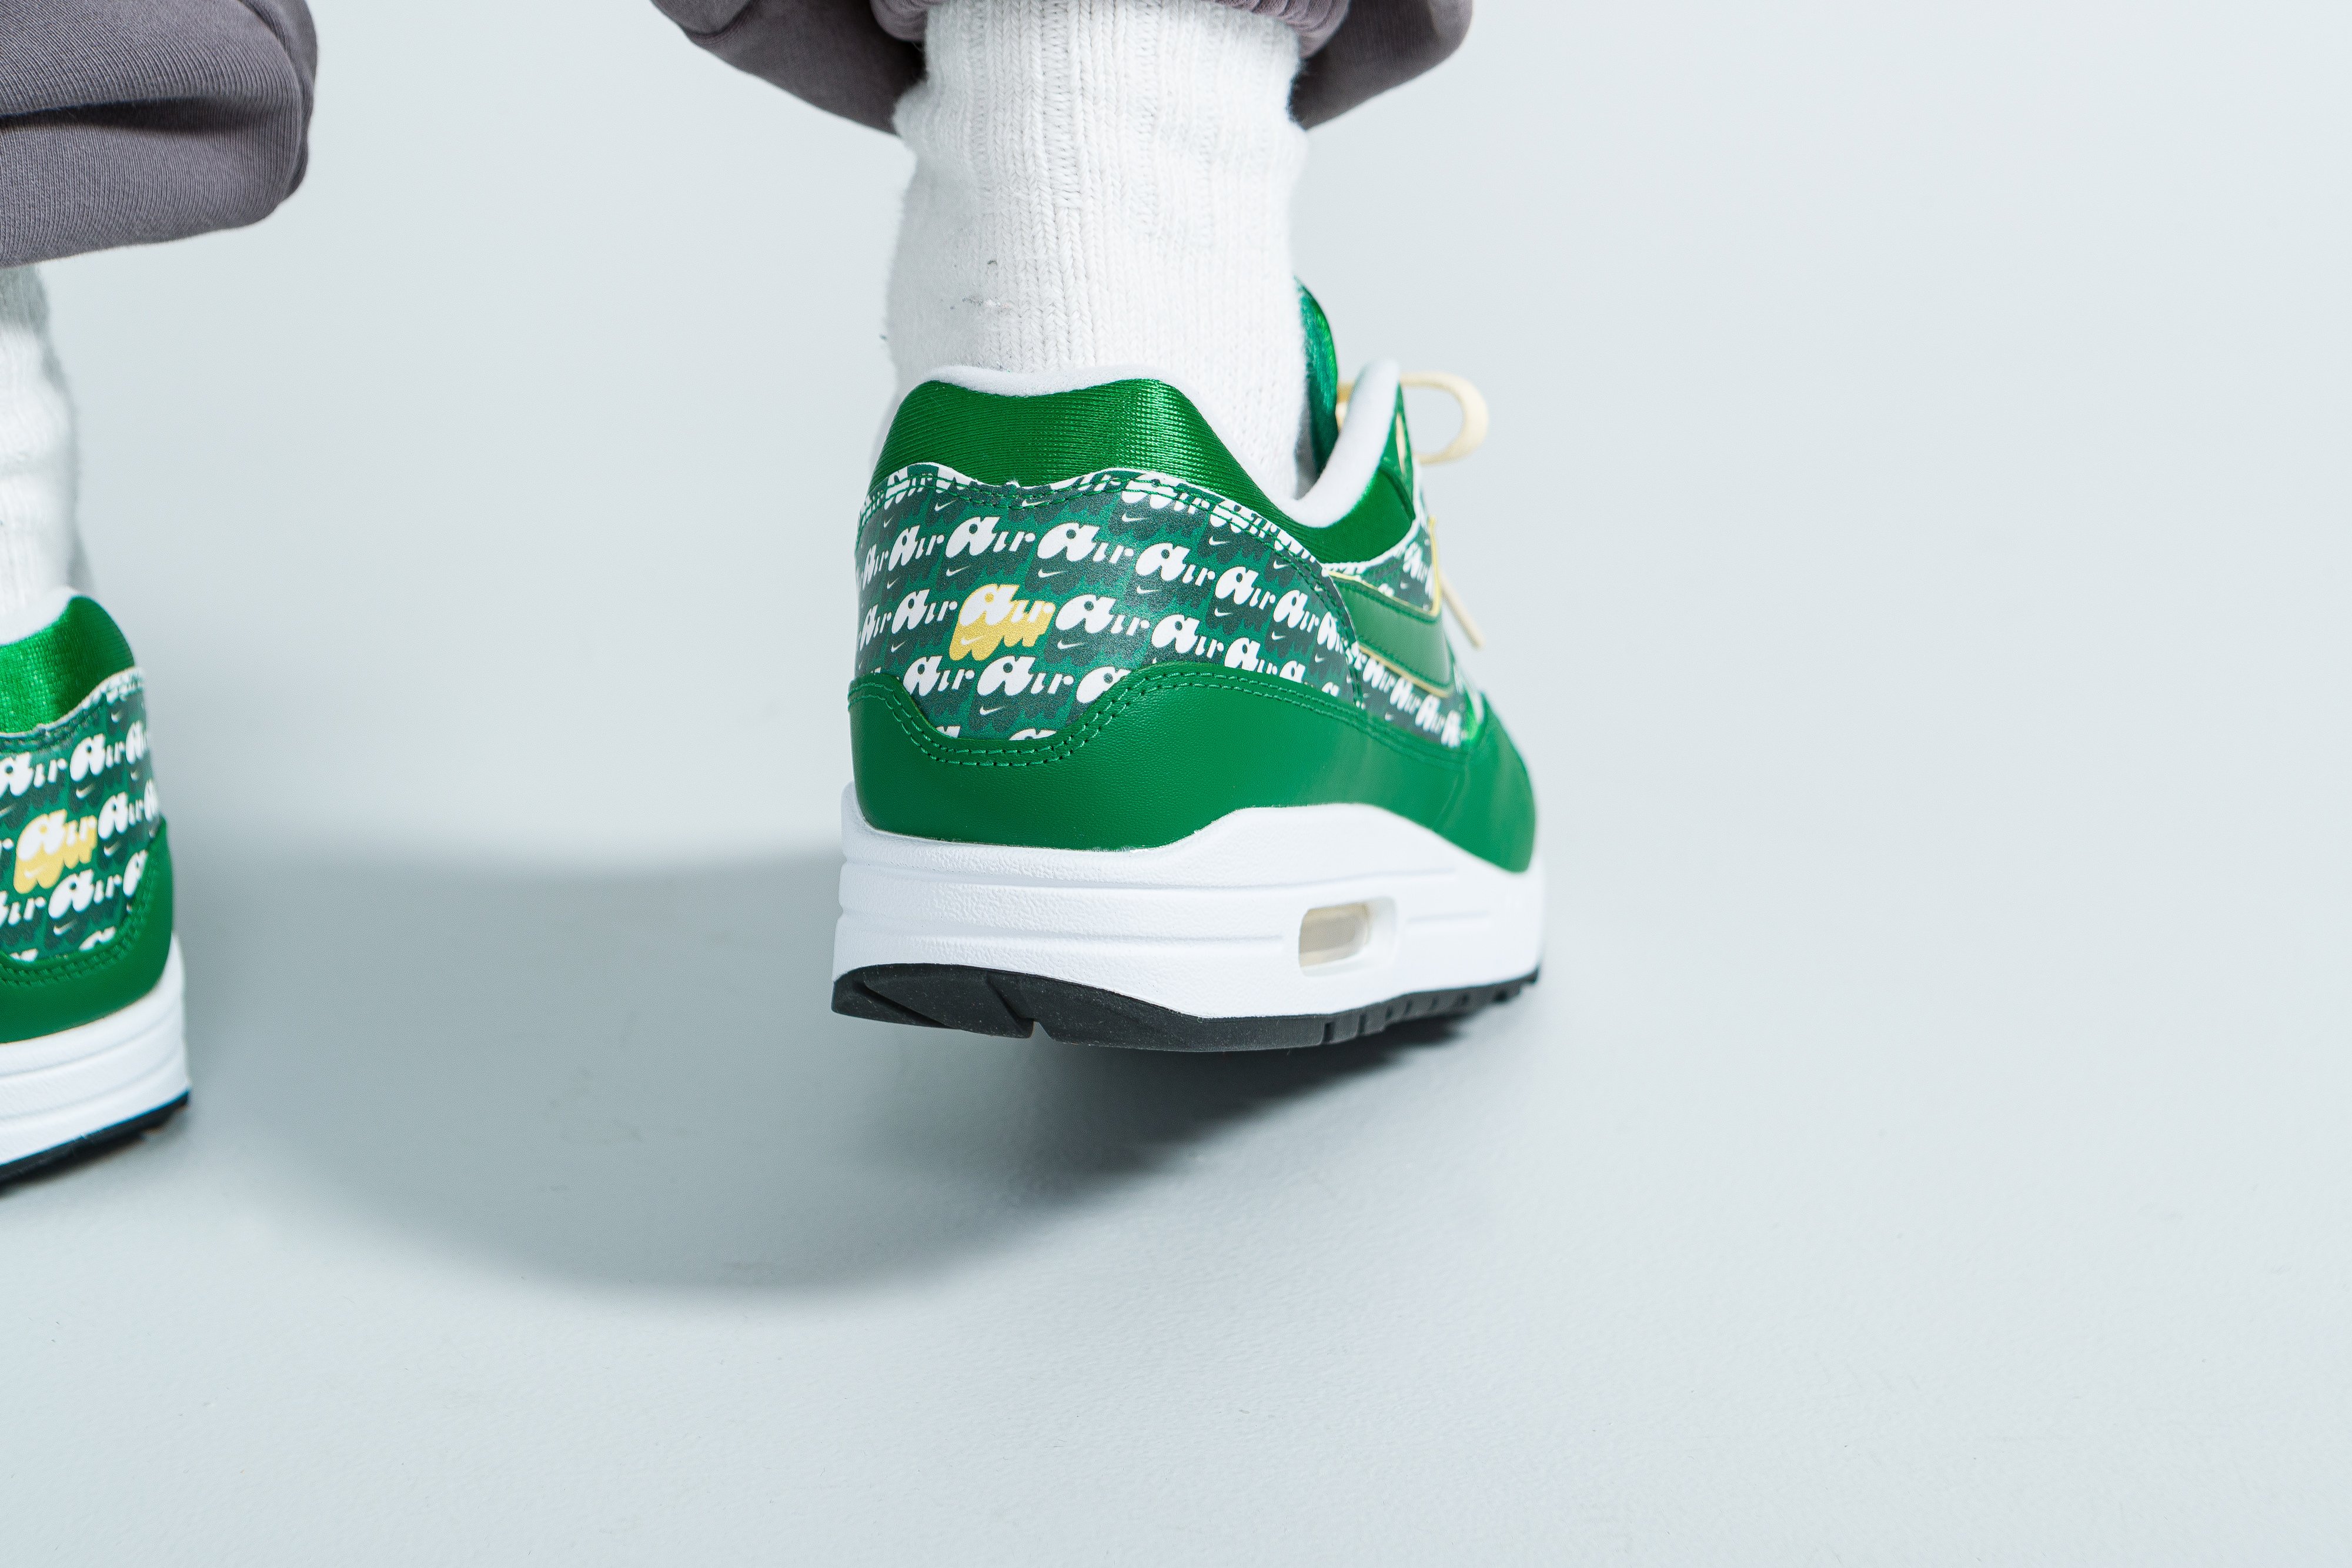 Up There Launches - Nike
Air Max 1 Premium - Pine Green/Pine Green-True White